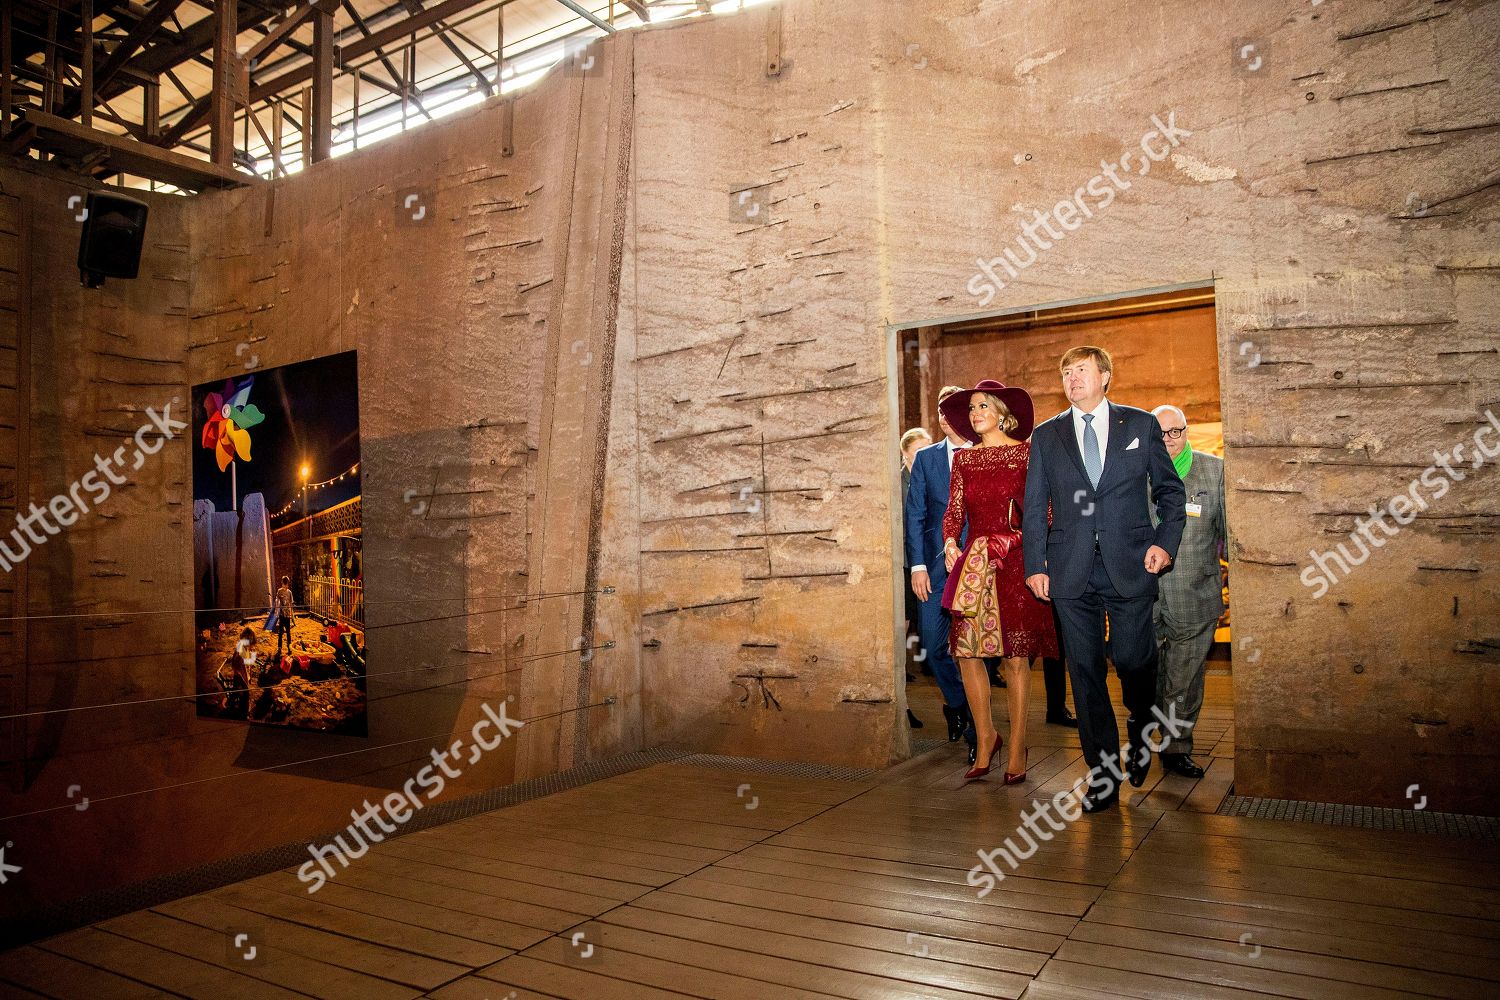 king-willem-alexander-and-queen-maxima-visit-to-germany-shutterstock-editorial-9928529q.jpg